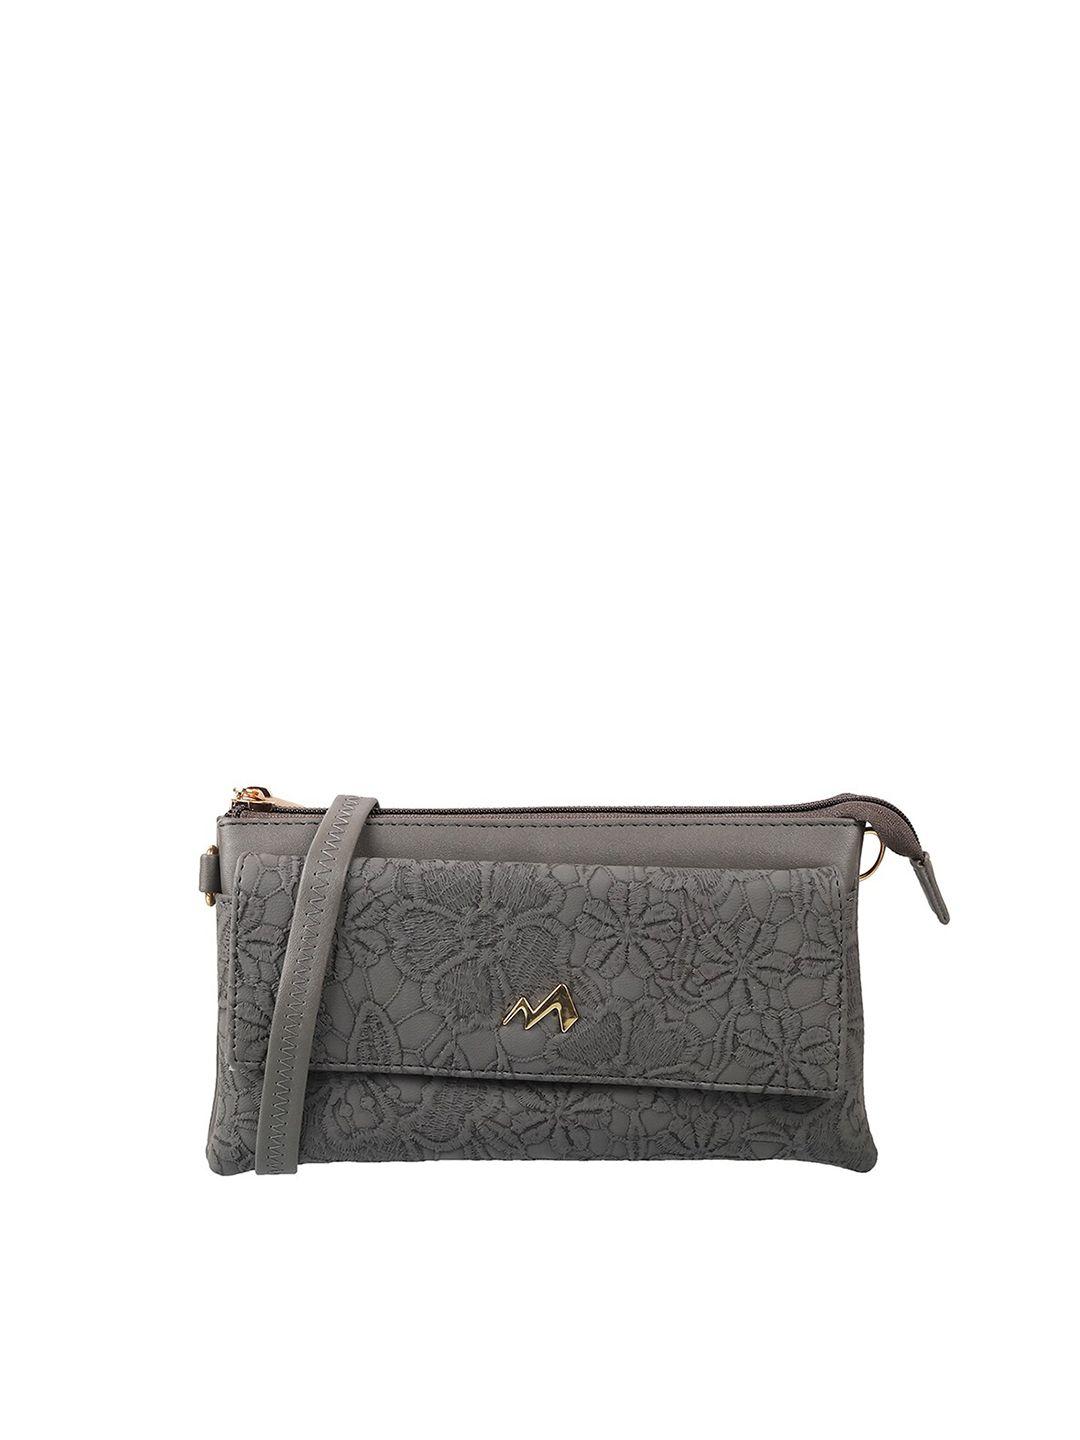 metro grey embroidered purse clutch